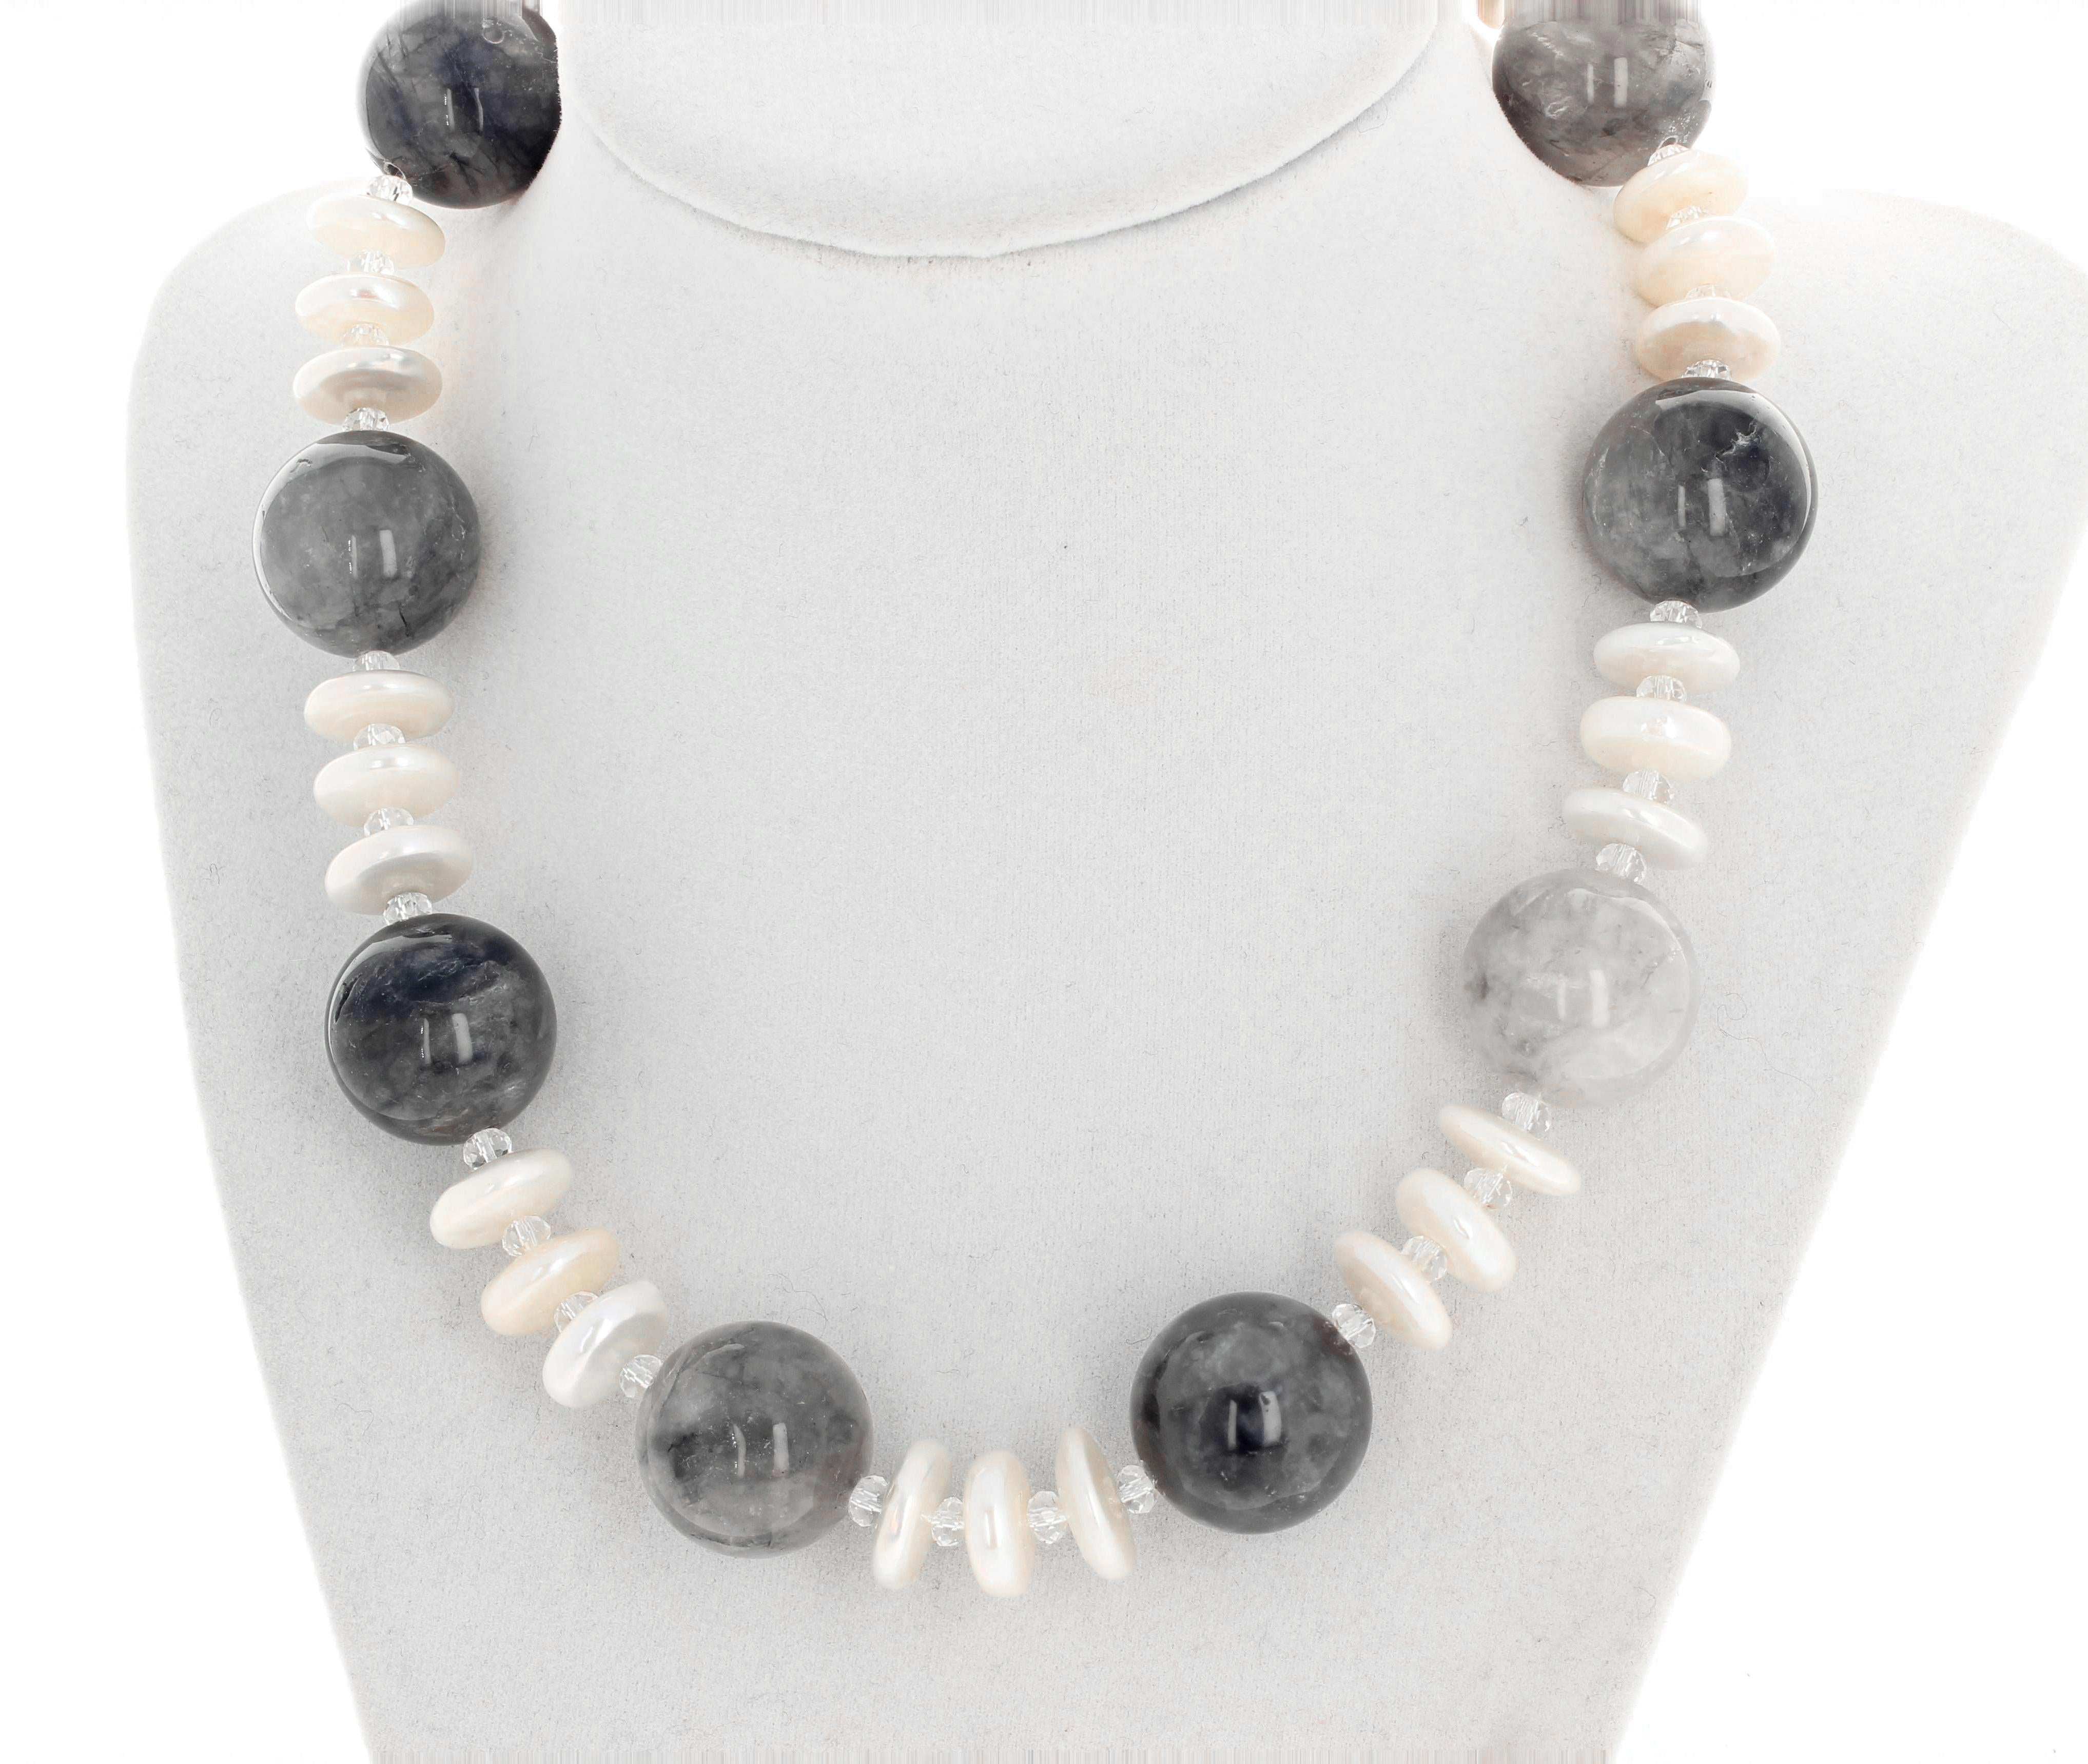 Bright white cultured coin Pearls (13 mm) enhance these lovely round highly polished Smoky Quartz (20 mm) all accented with checkerboard gem cut tiny little sparkling quartz.  The clasp is silver hook/pearl.  This lovely statement necklace is 16.5